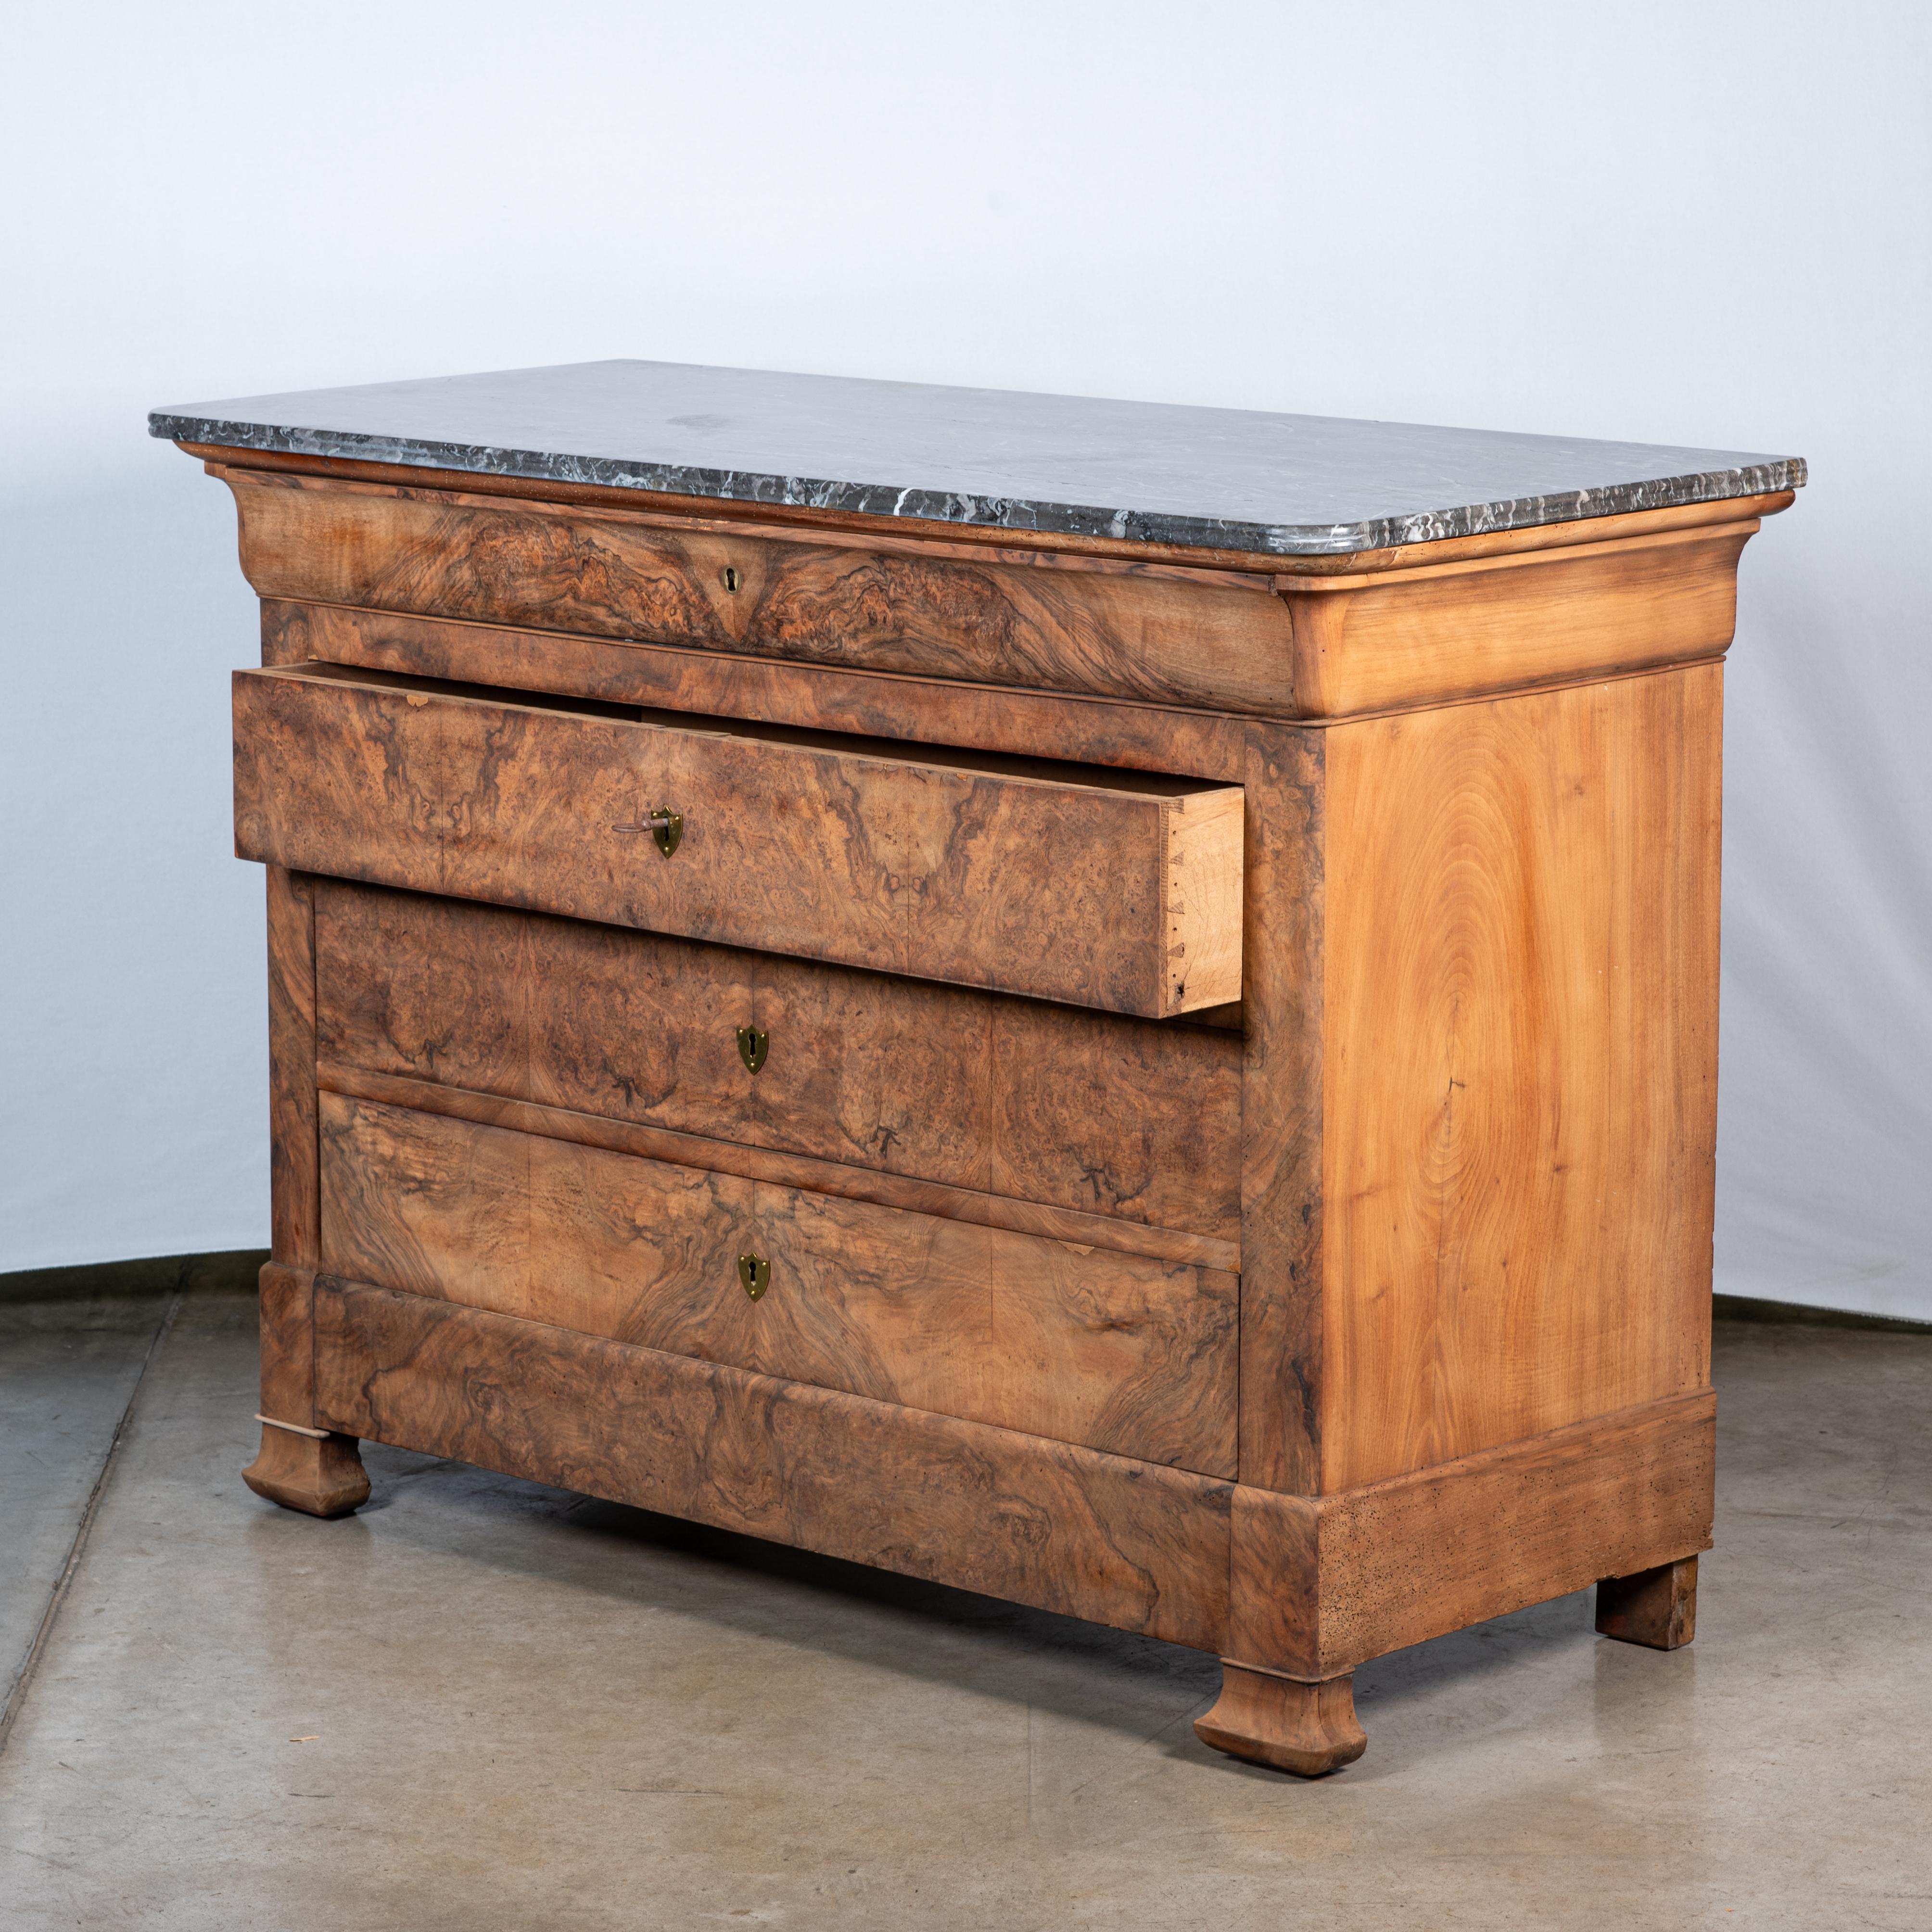 19th Century French Louis Philippe Burl Walnut Commode In Good Condition For Sale In San Antonio, TX